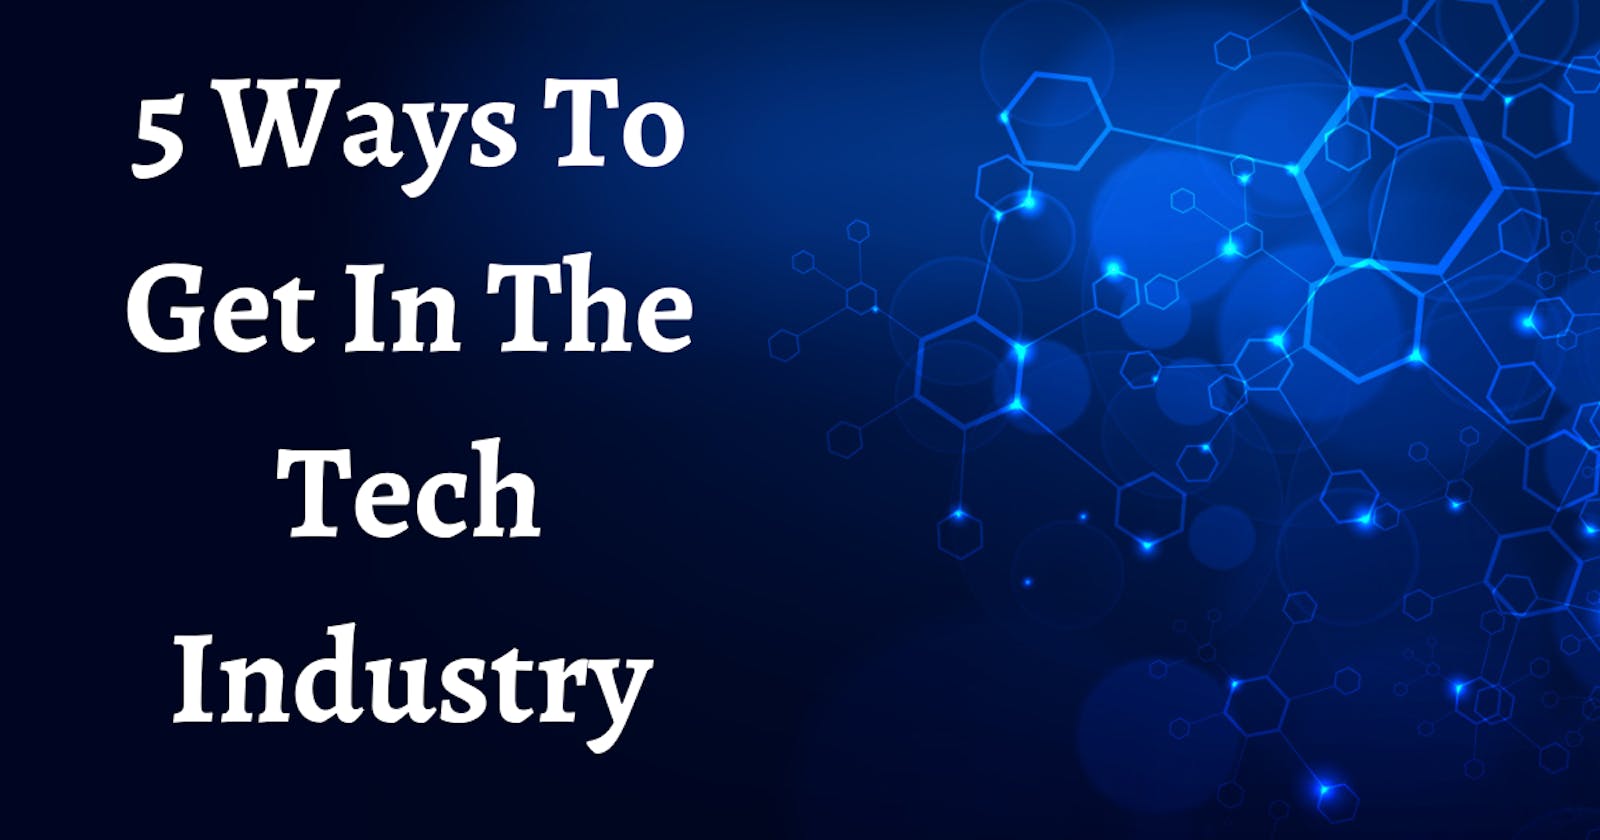 5 Ways To Get In The Tech Industry